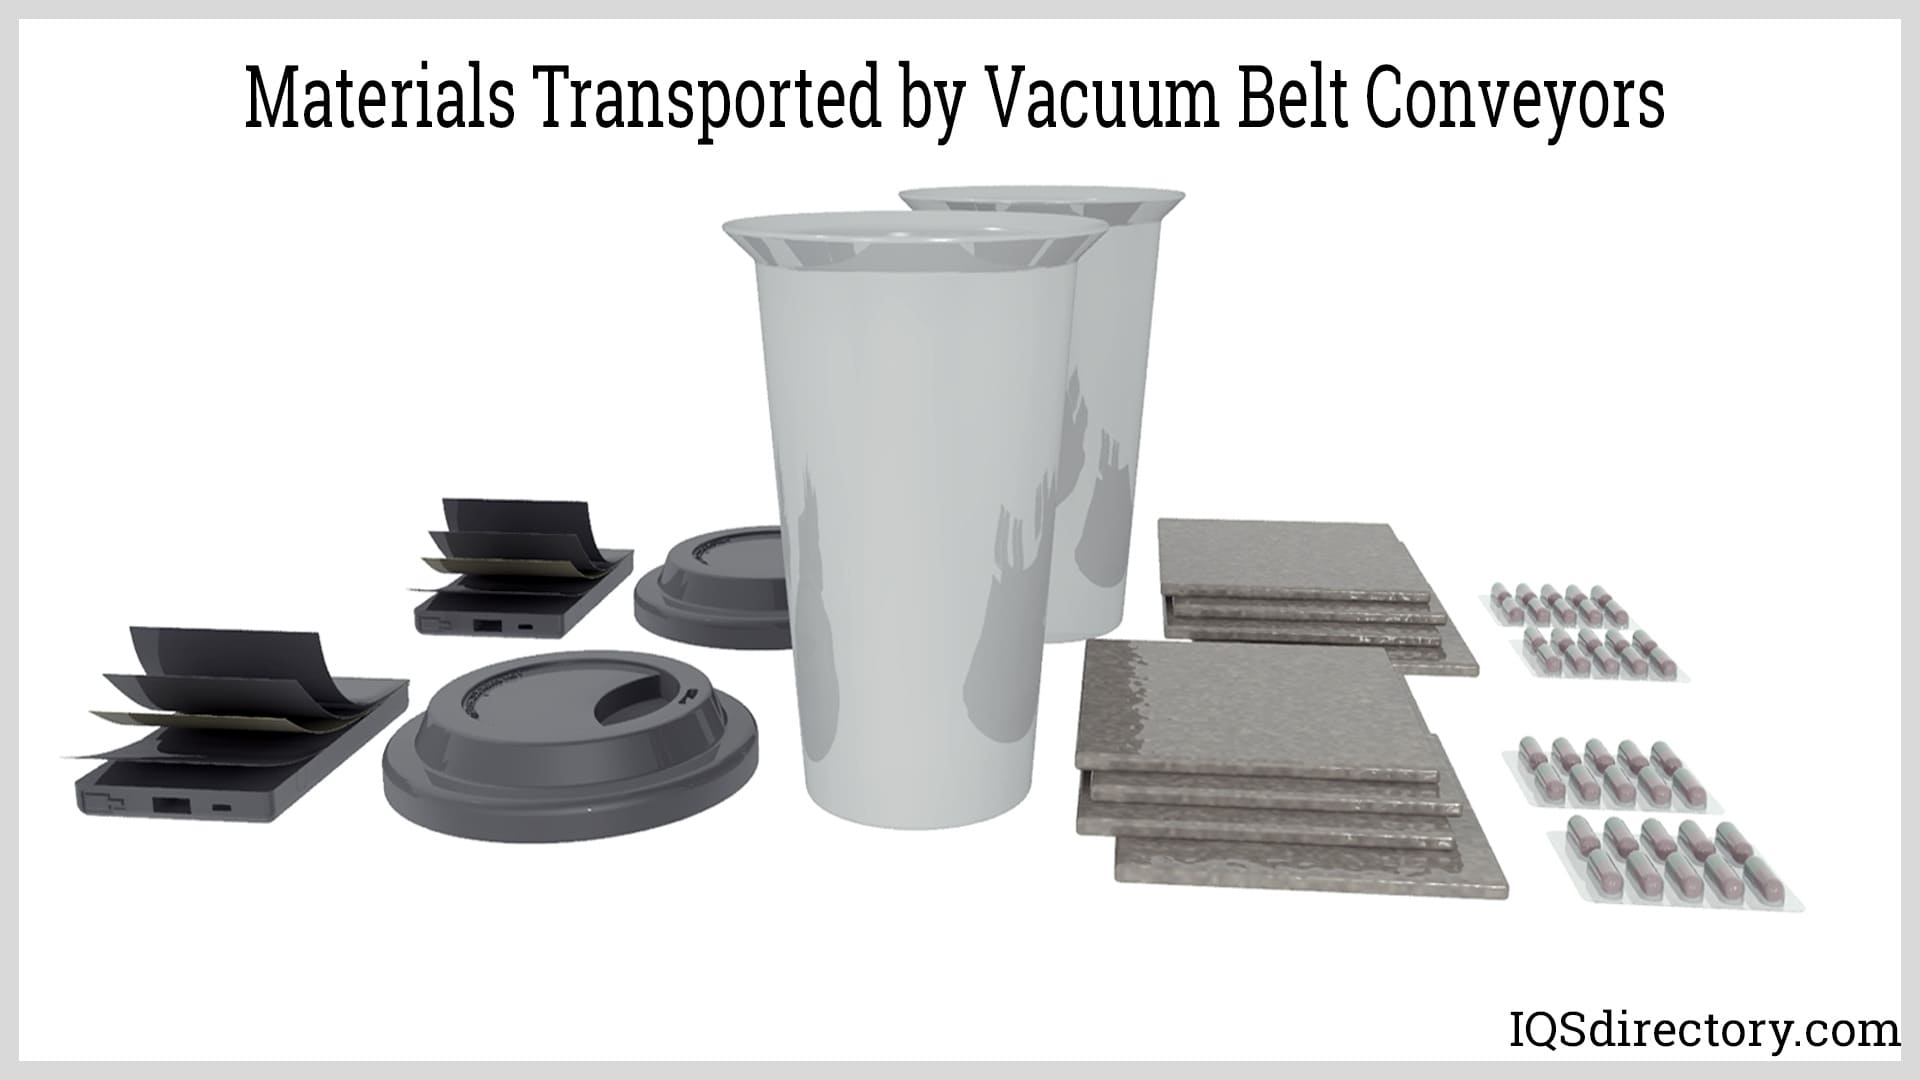 Materials Transported by Vacuum Belt Conveyors